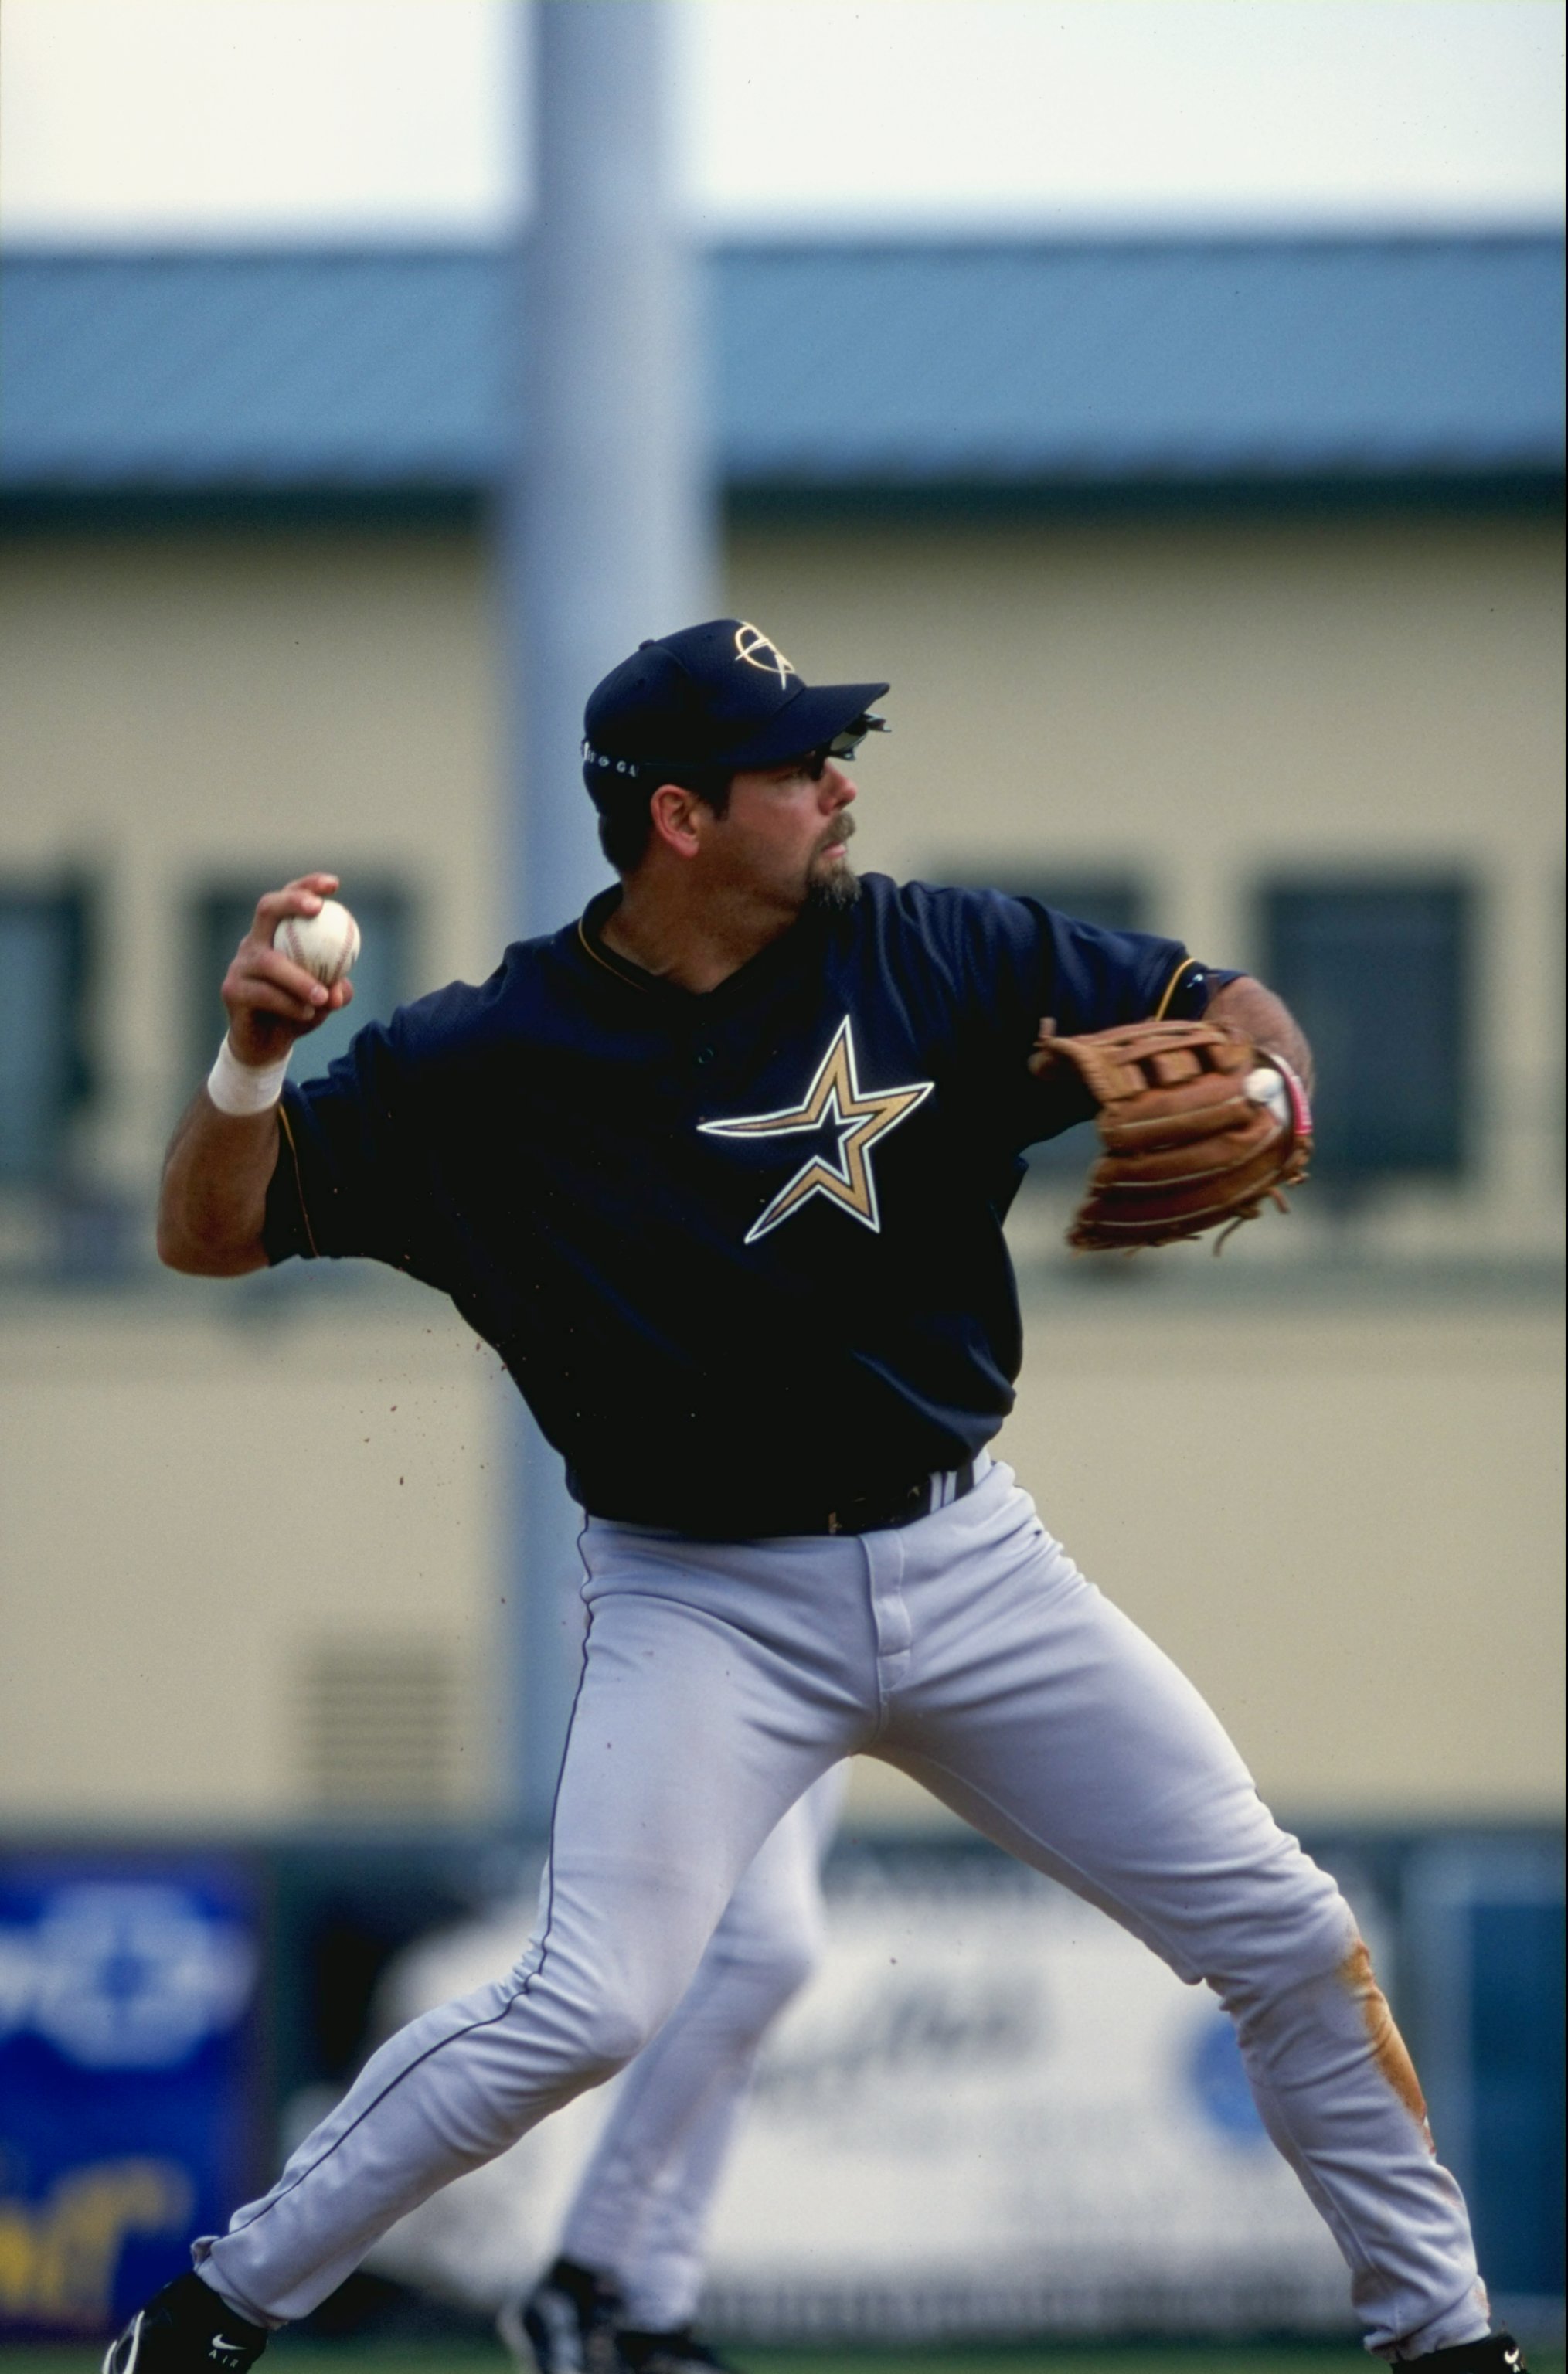 8 Mar 1999: Infielder Ken Caminiti #11 of the Houston Astros throws the ball during the Spring Training game against the St. Louis Cardinals at the Roger Dean Stadium in Jupiter, Florida. The Astros defeated the Cardinals 2-1. Mandatory Credit: David Leed